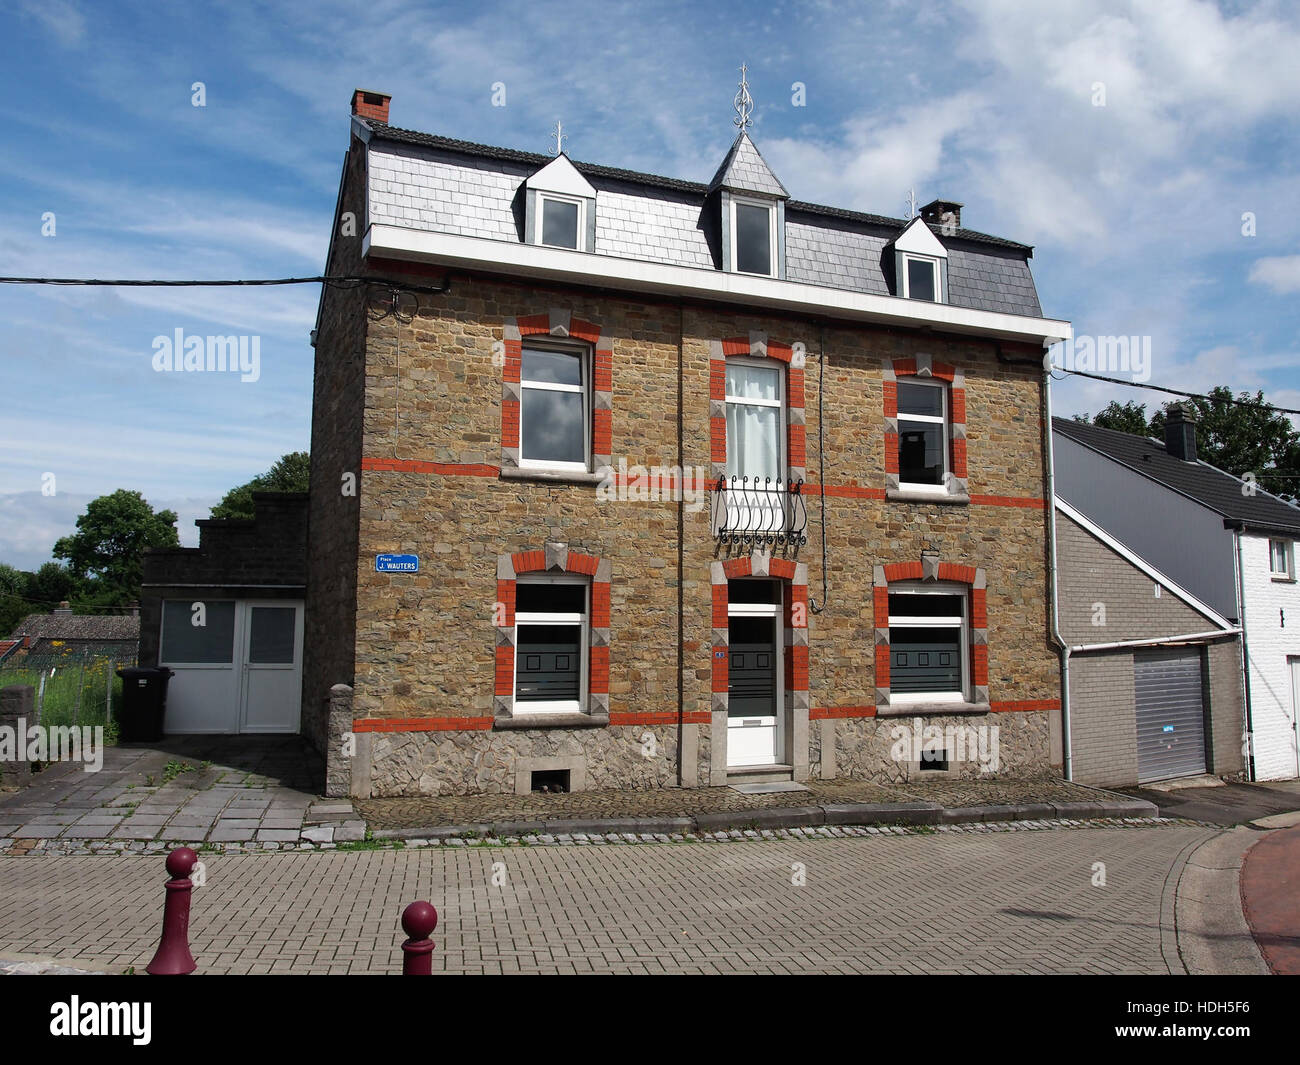 Ort J Wauters, Sprimont pic1 Stockfoto